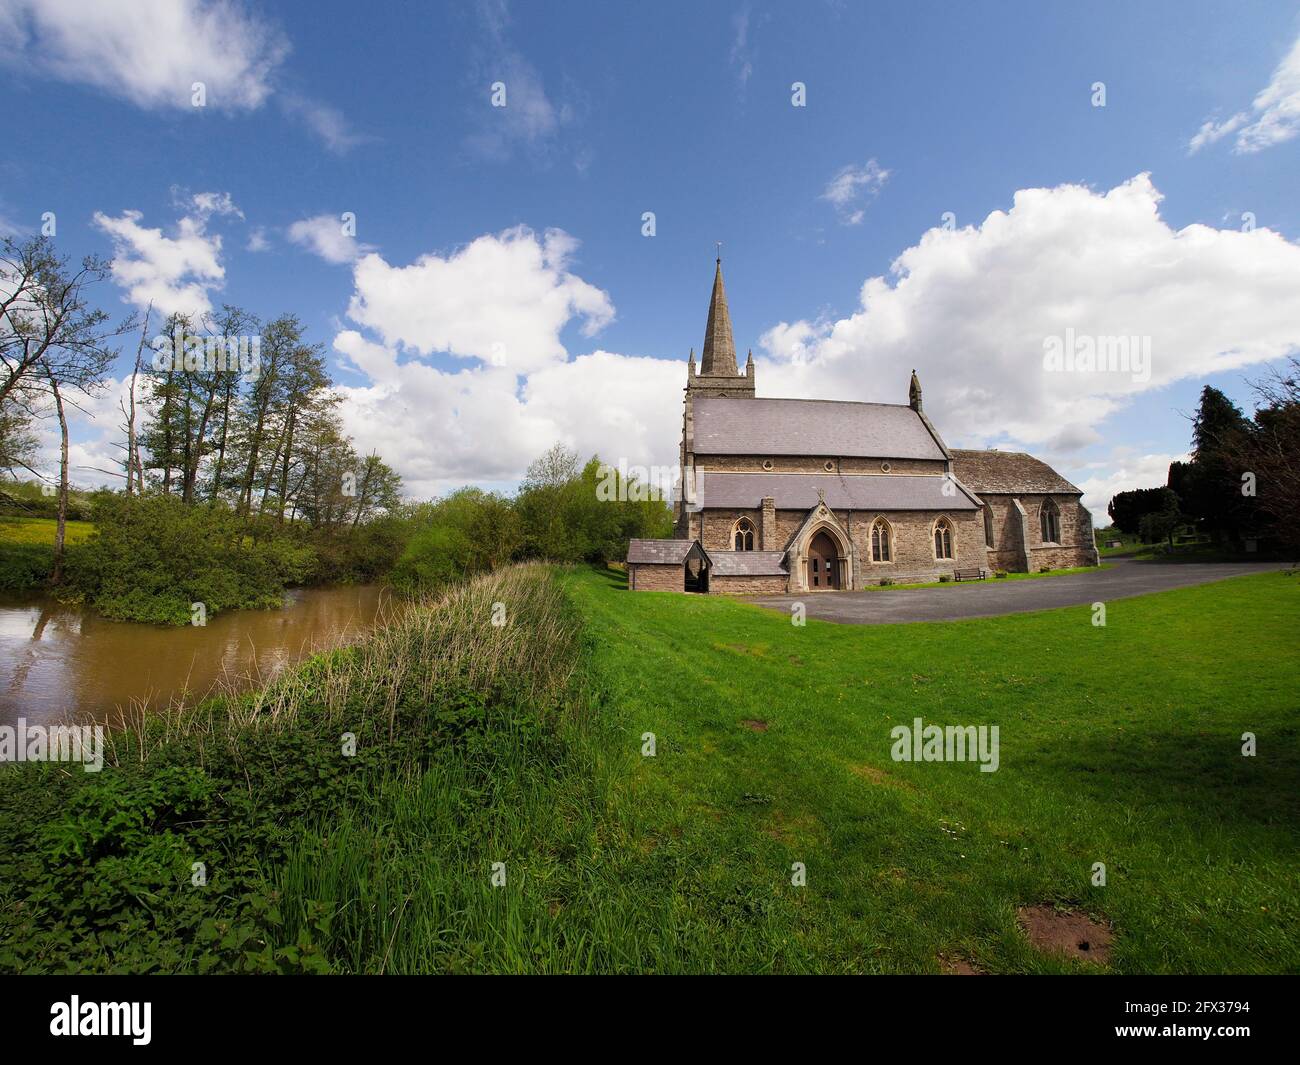 The historic church of St Mary the Virgin, Marden is a Grade 1 listed building, peaceful and rural on the banks of the River Lugg. Stock Photo